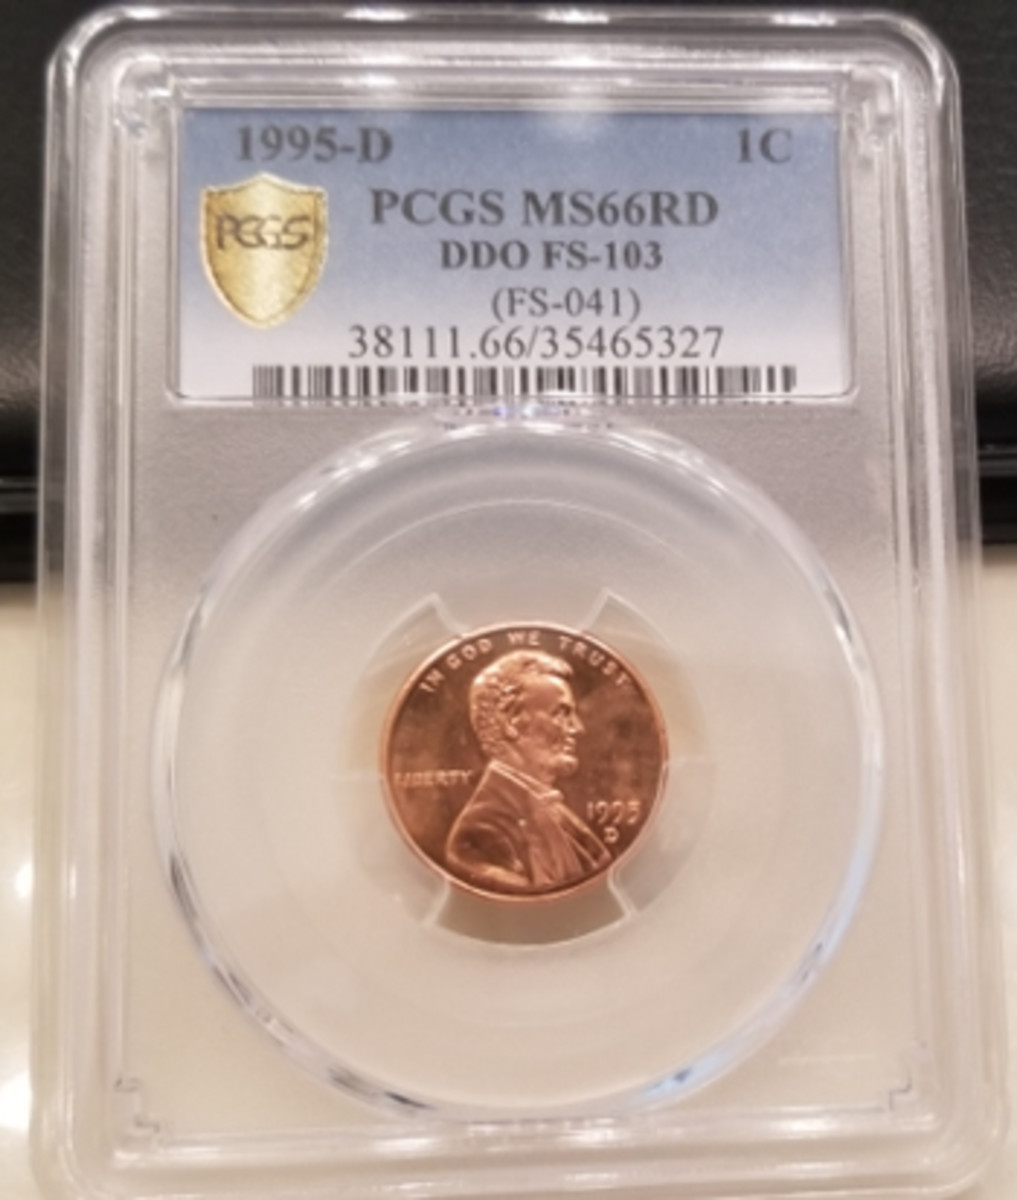  Here is one of the doubled-die cents authenticated by the Professional Coin Grading Service.